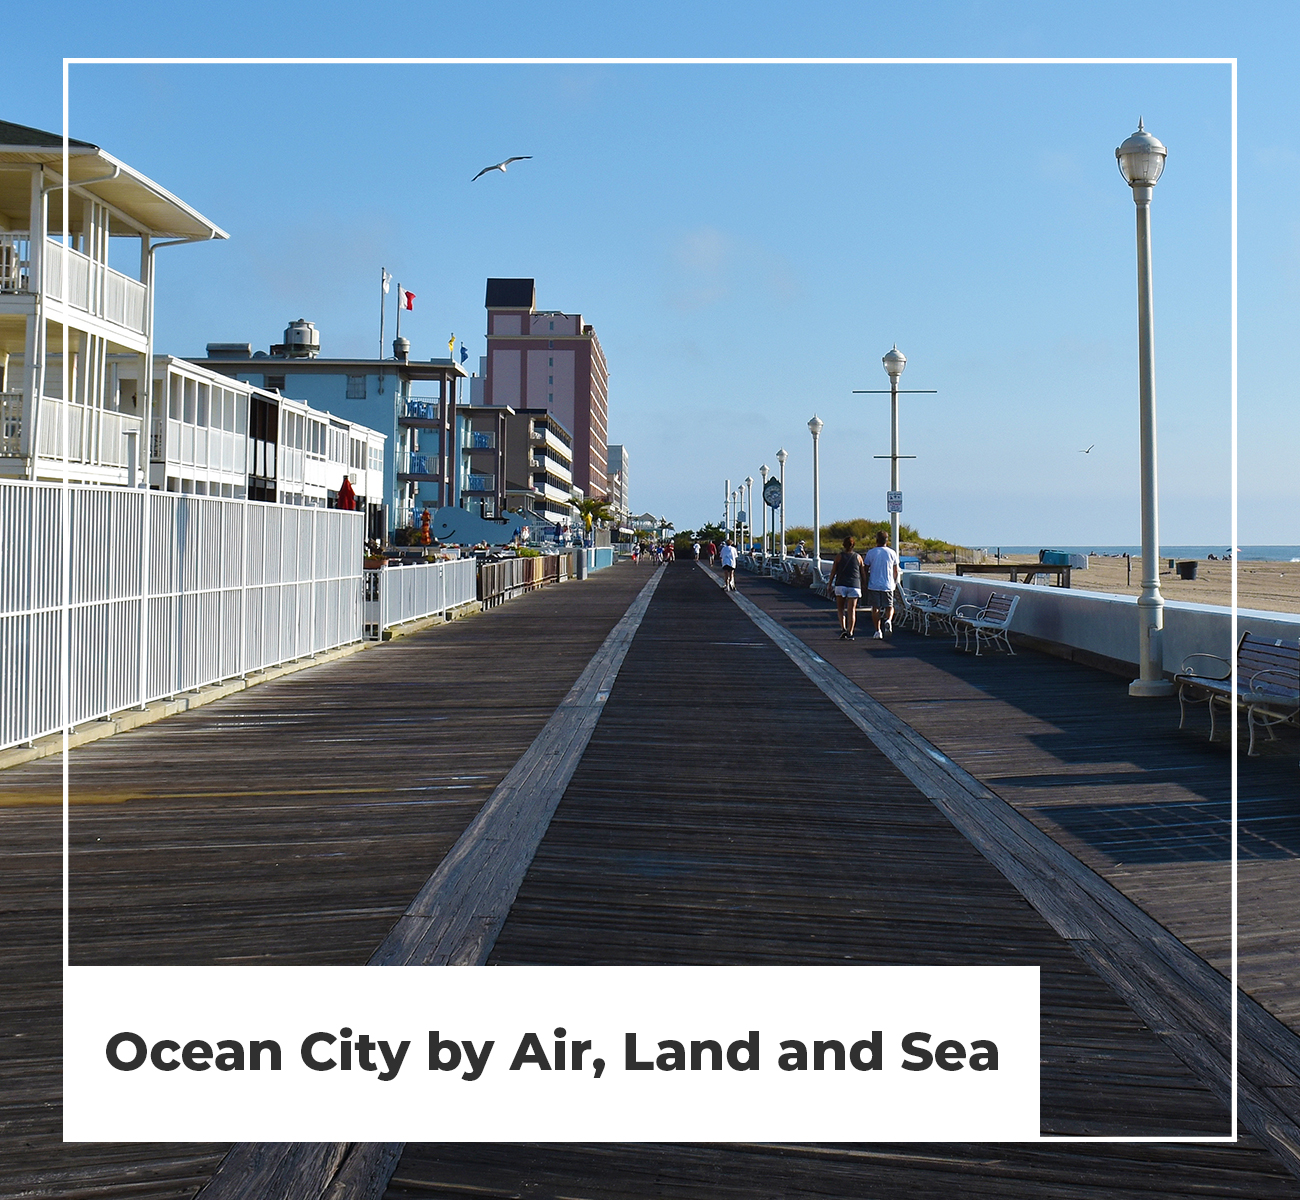 Ocean City, by Air Land and Sea